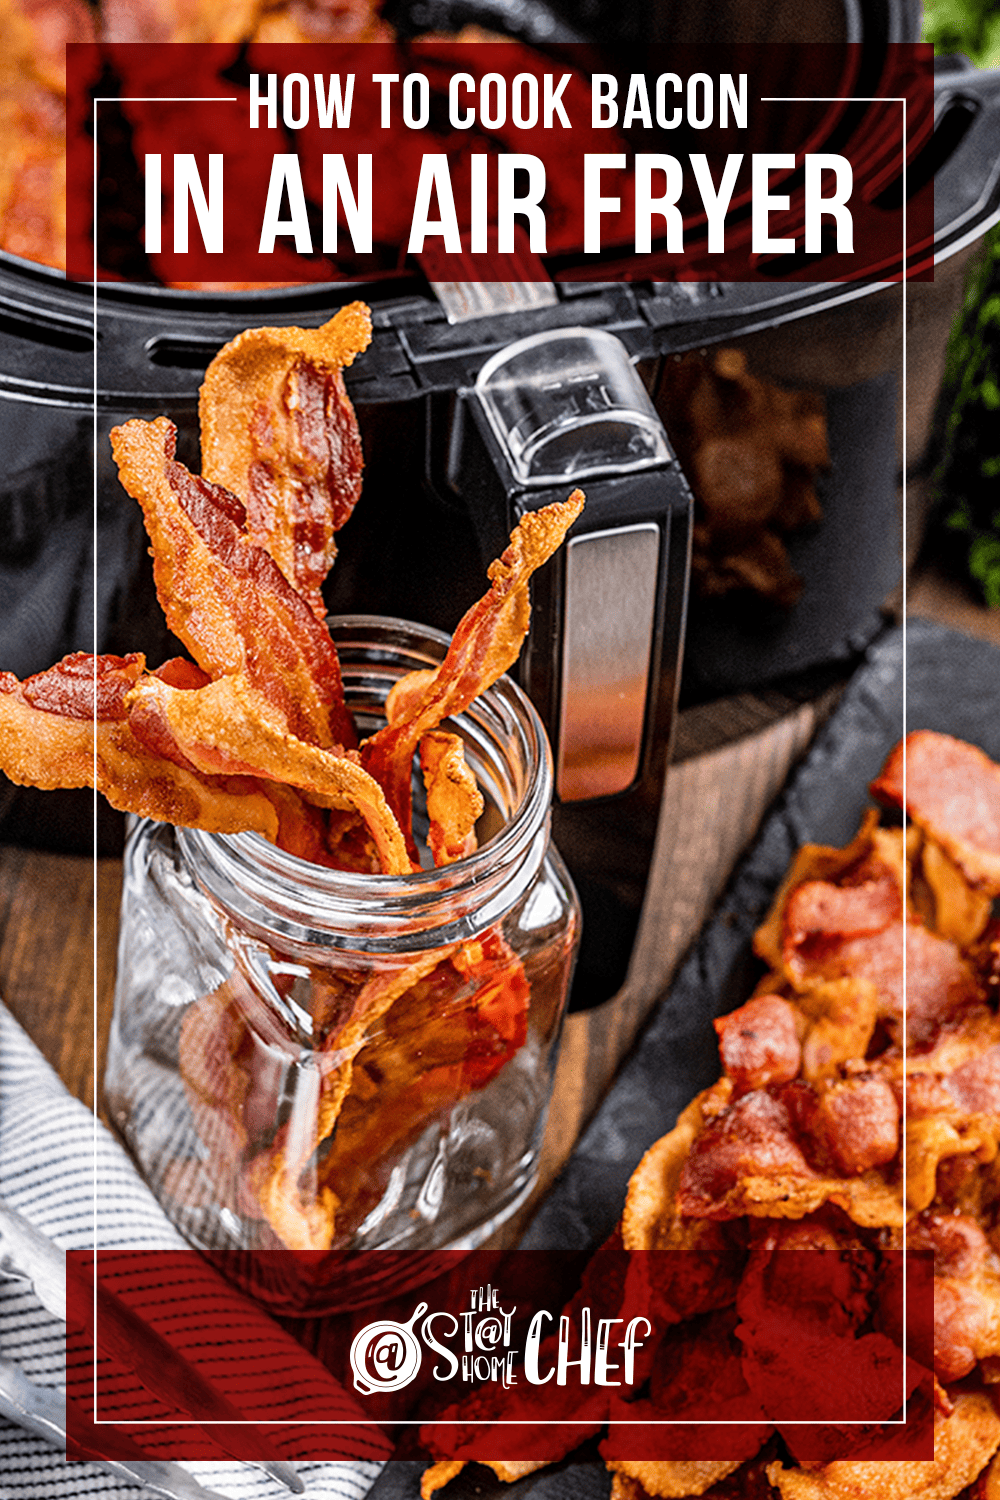 How to Cook Bacon in an Air Fryer